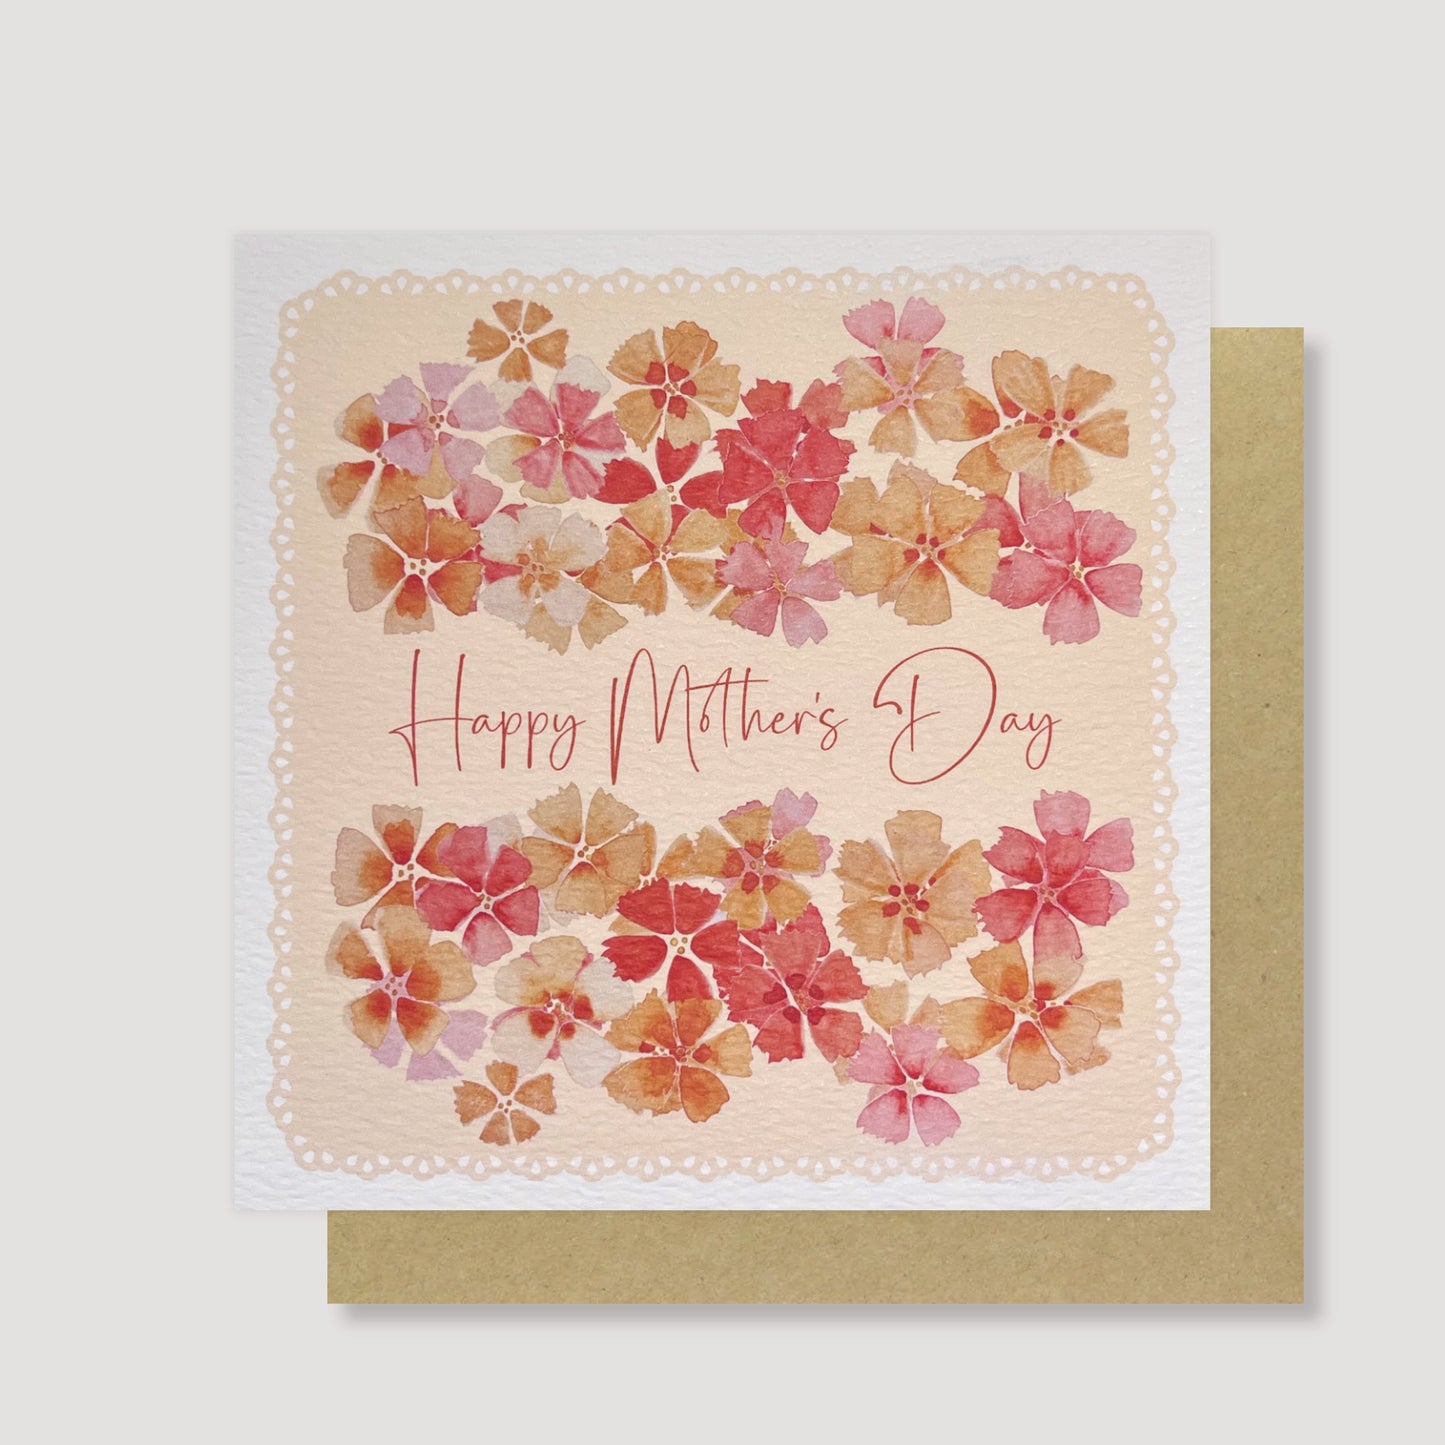 Happy Mother's Day pressed flowers card